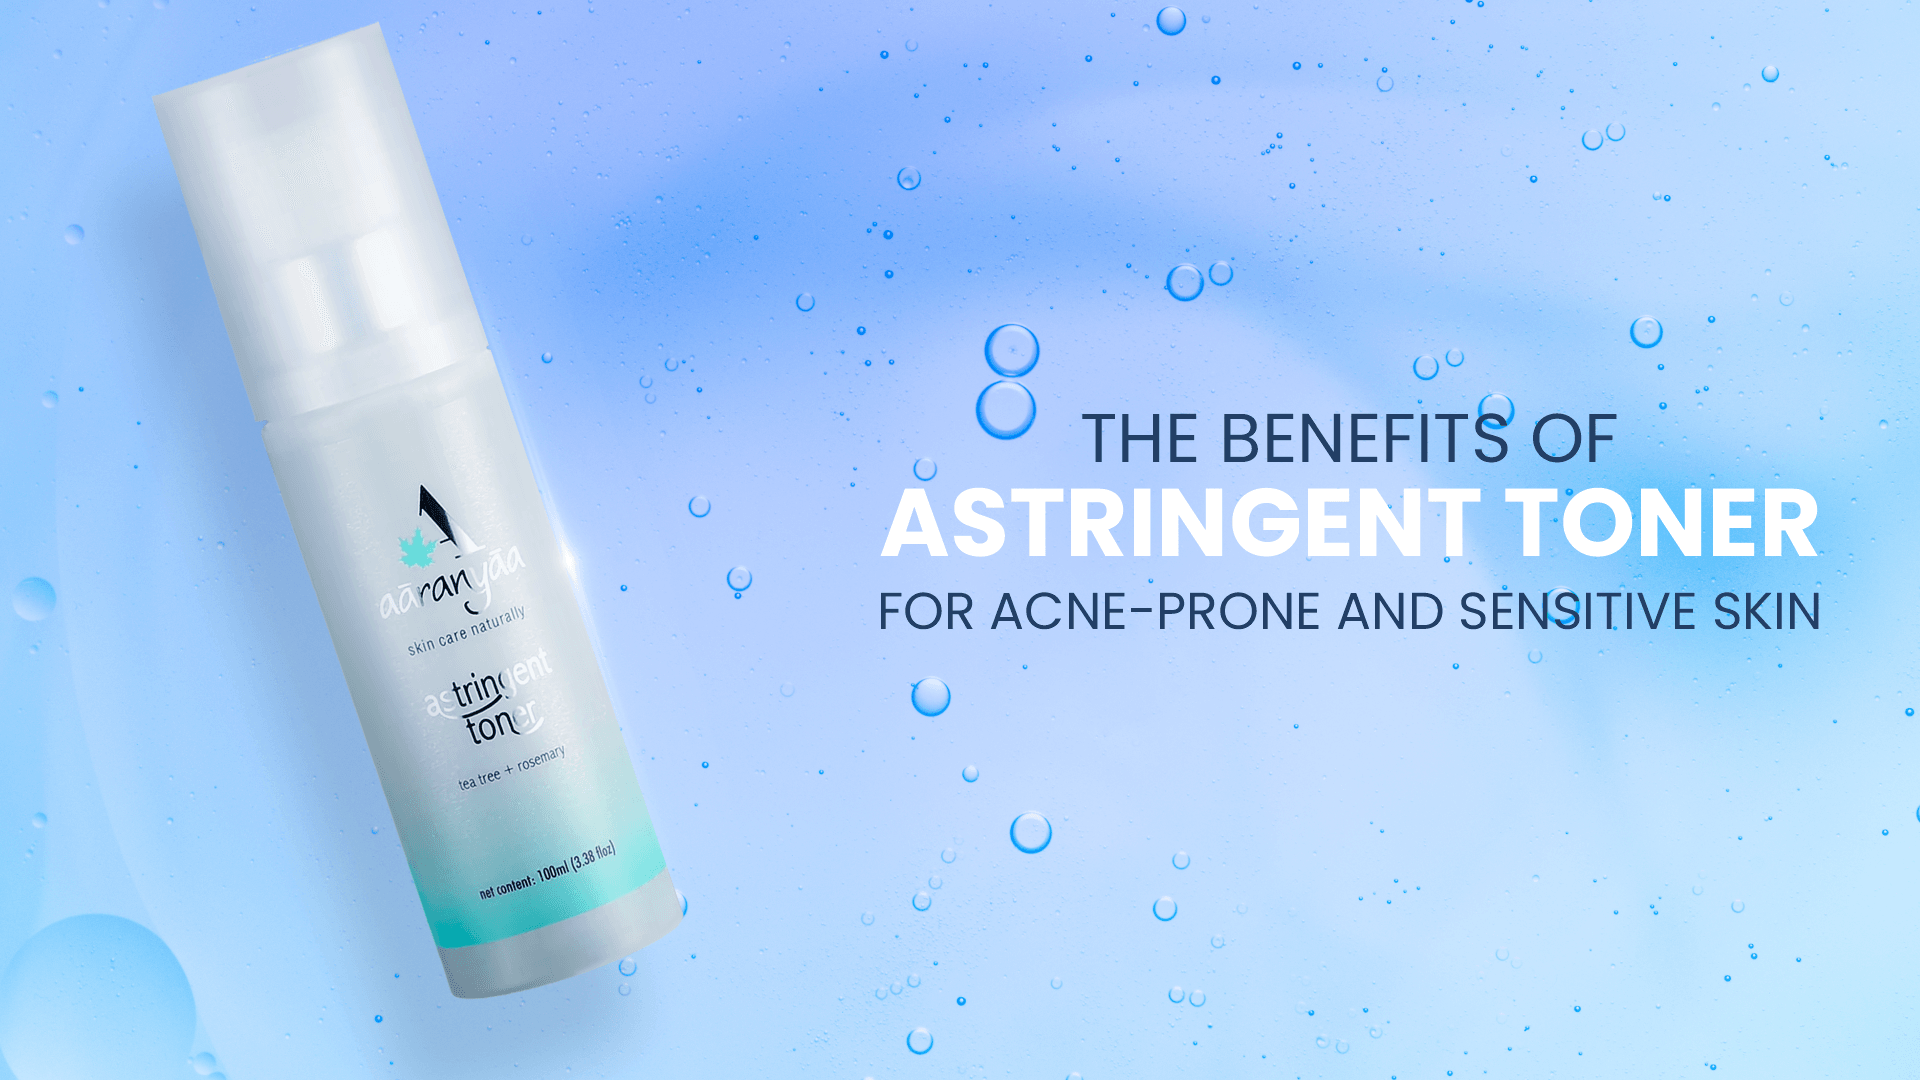 The Benefits of Astringent Toner for Acne-Prone and Sensitive Skin - aaranyaa skincare